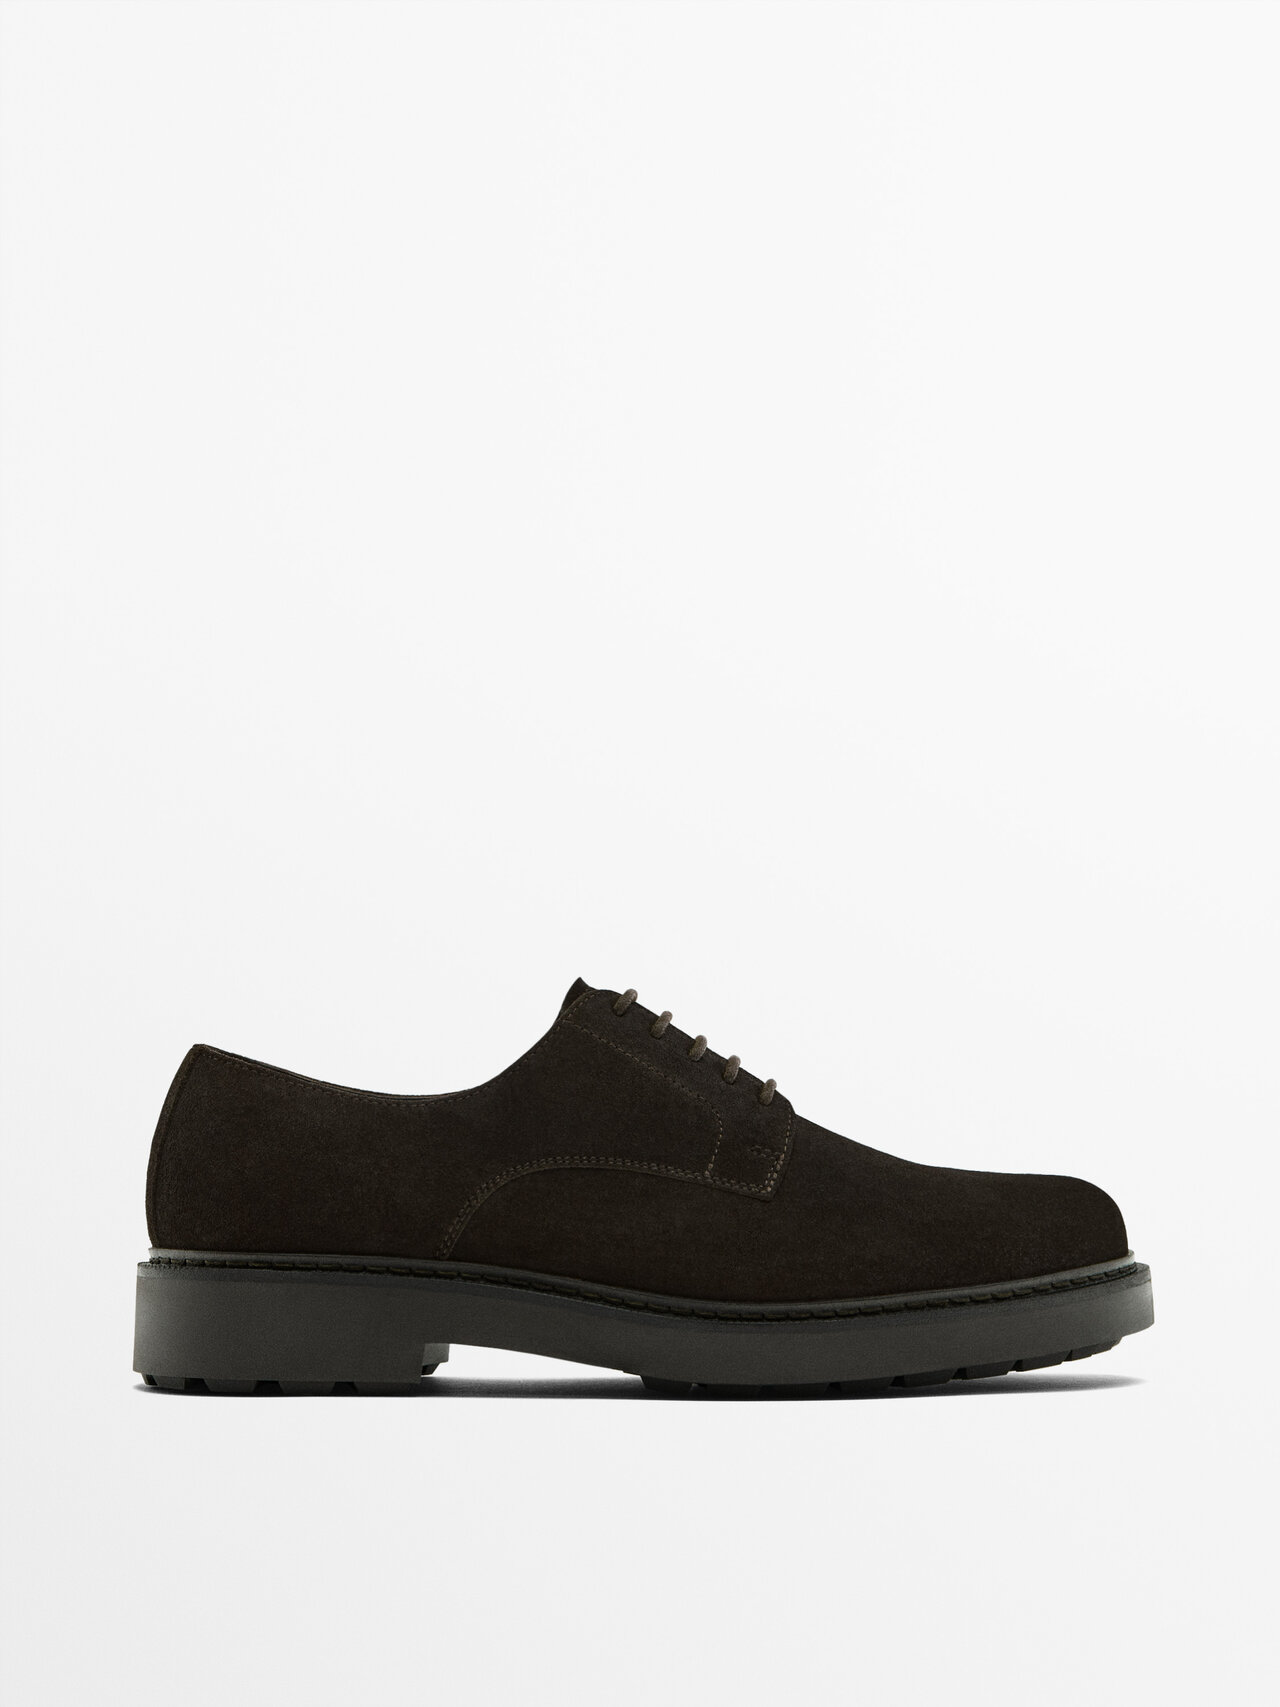 Massimo Dutti Brown Split Suede Shoes